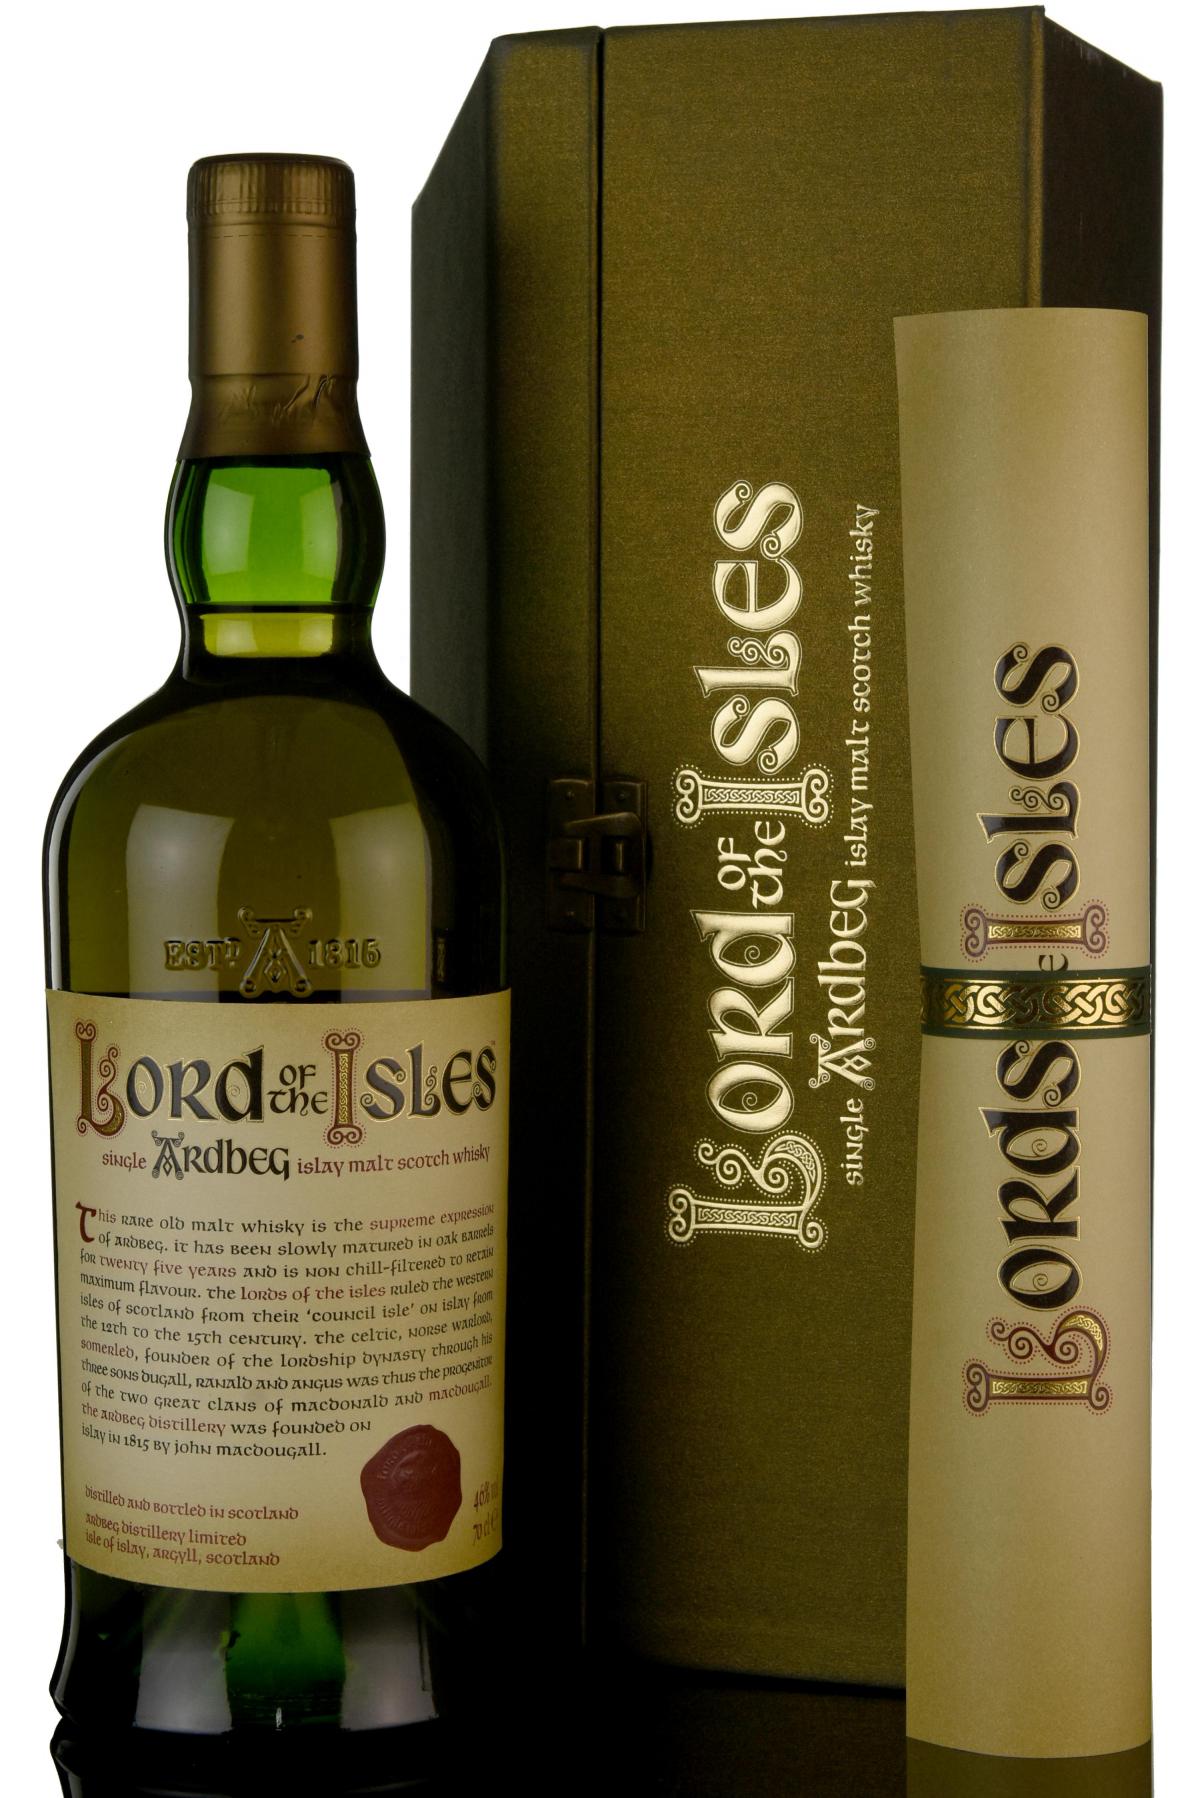 Ardbeg Lord Of The Isles - 25 Year Old